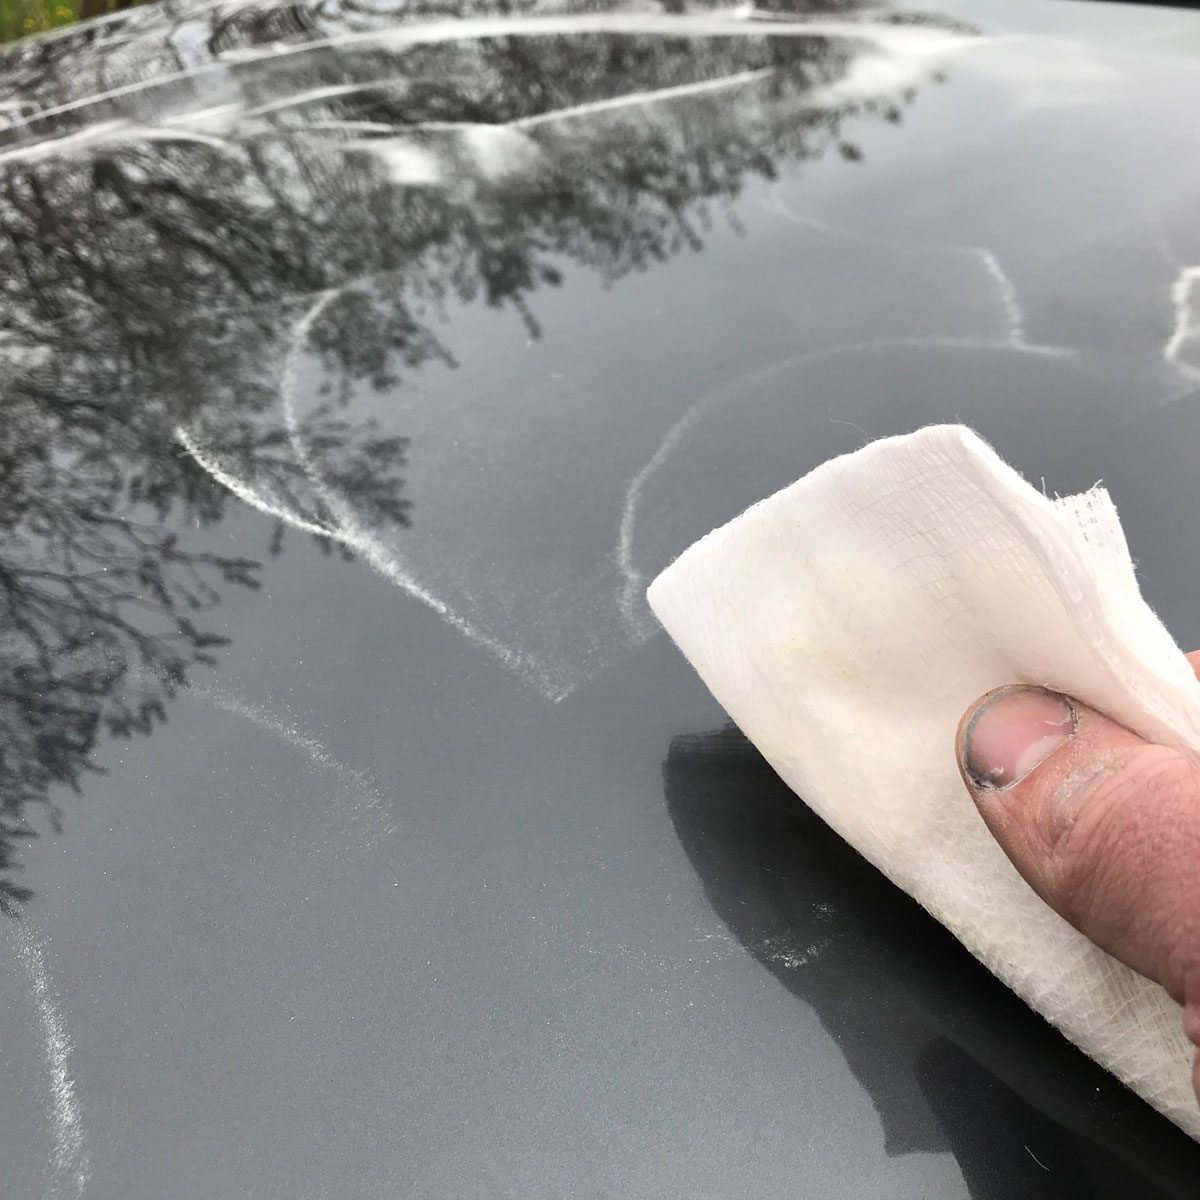 Wiping a car